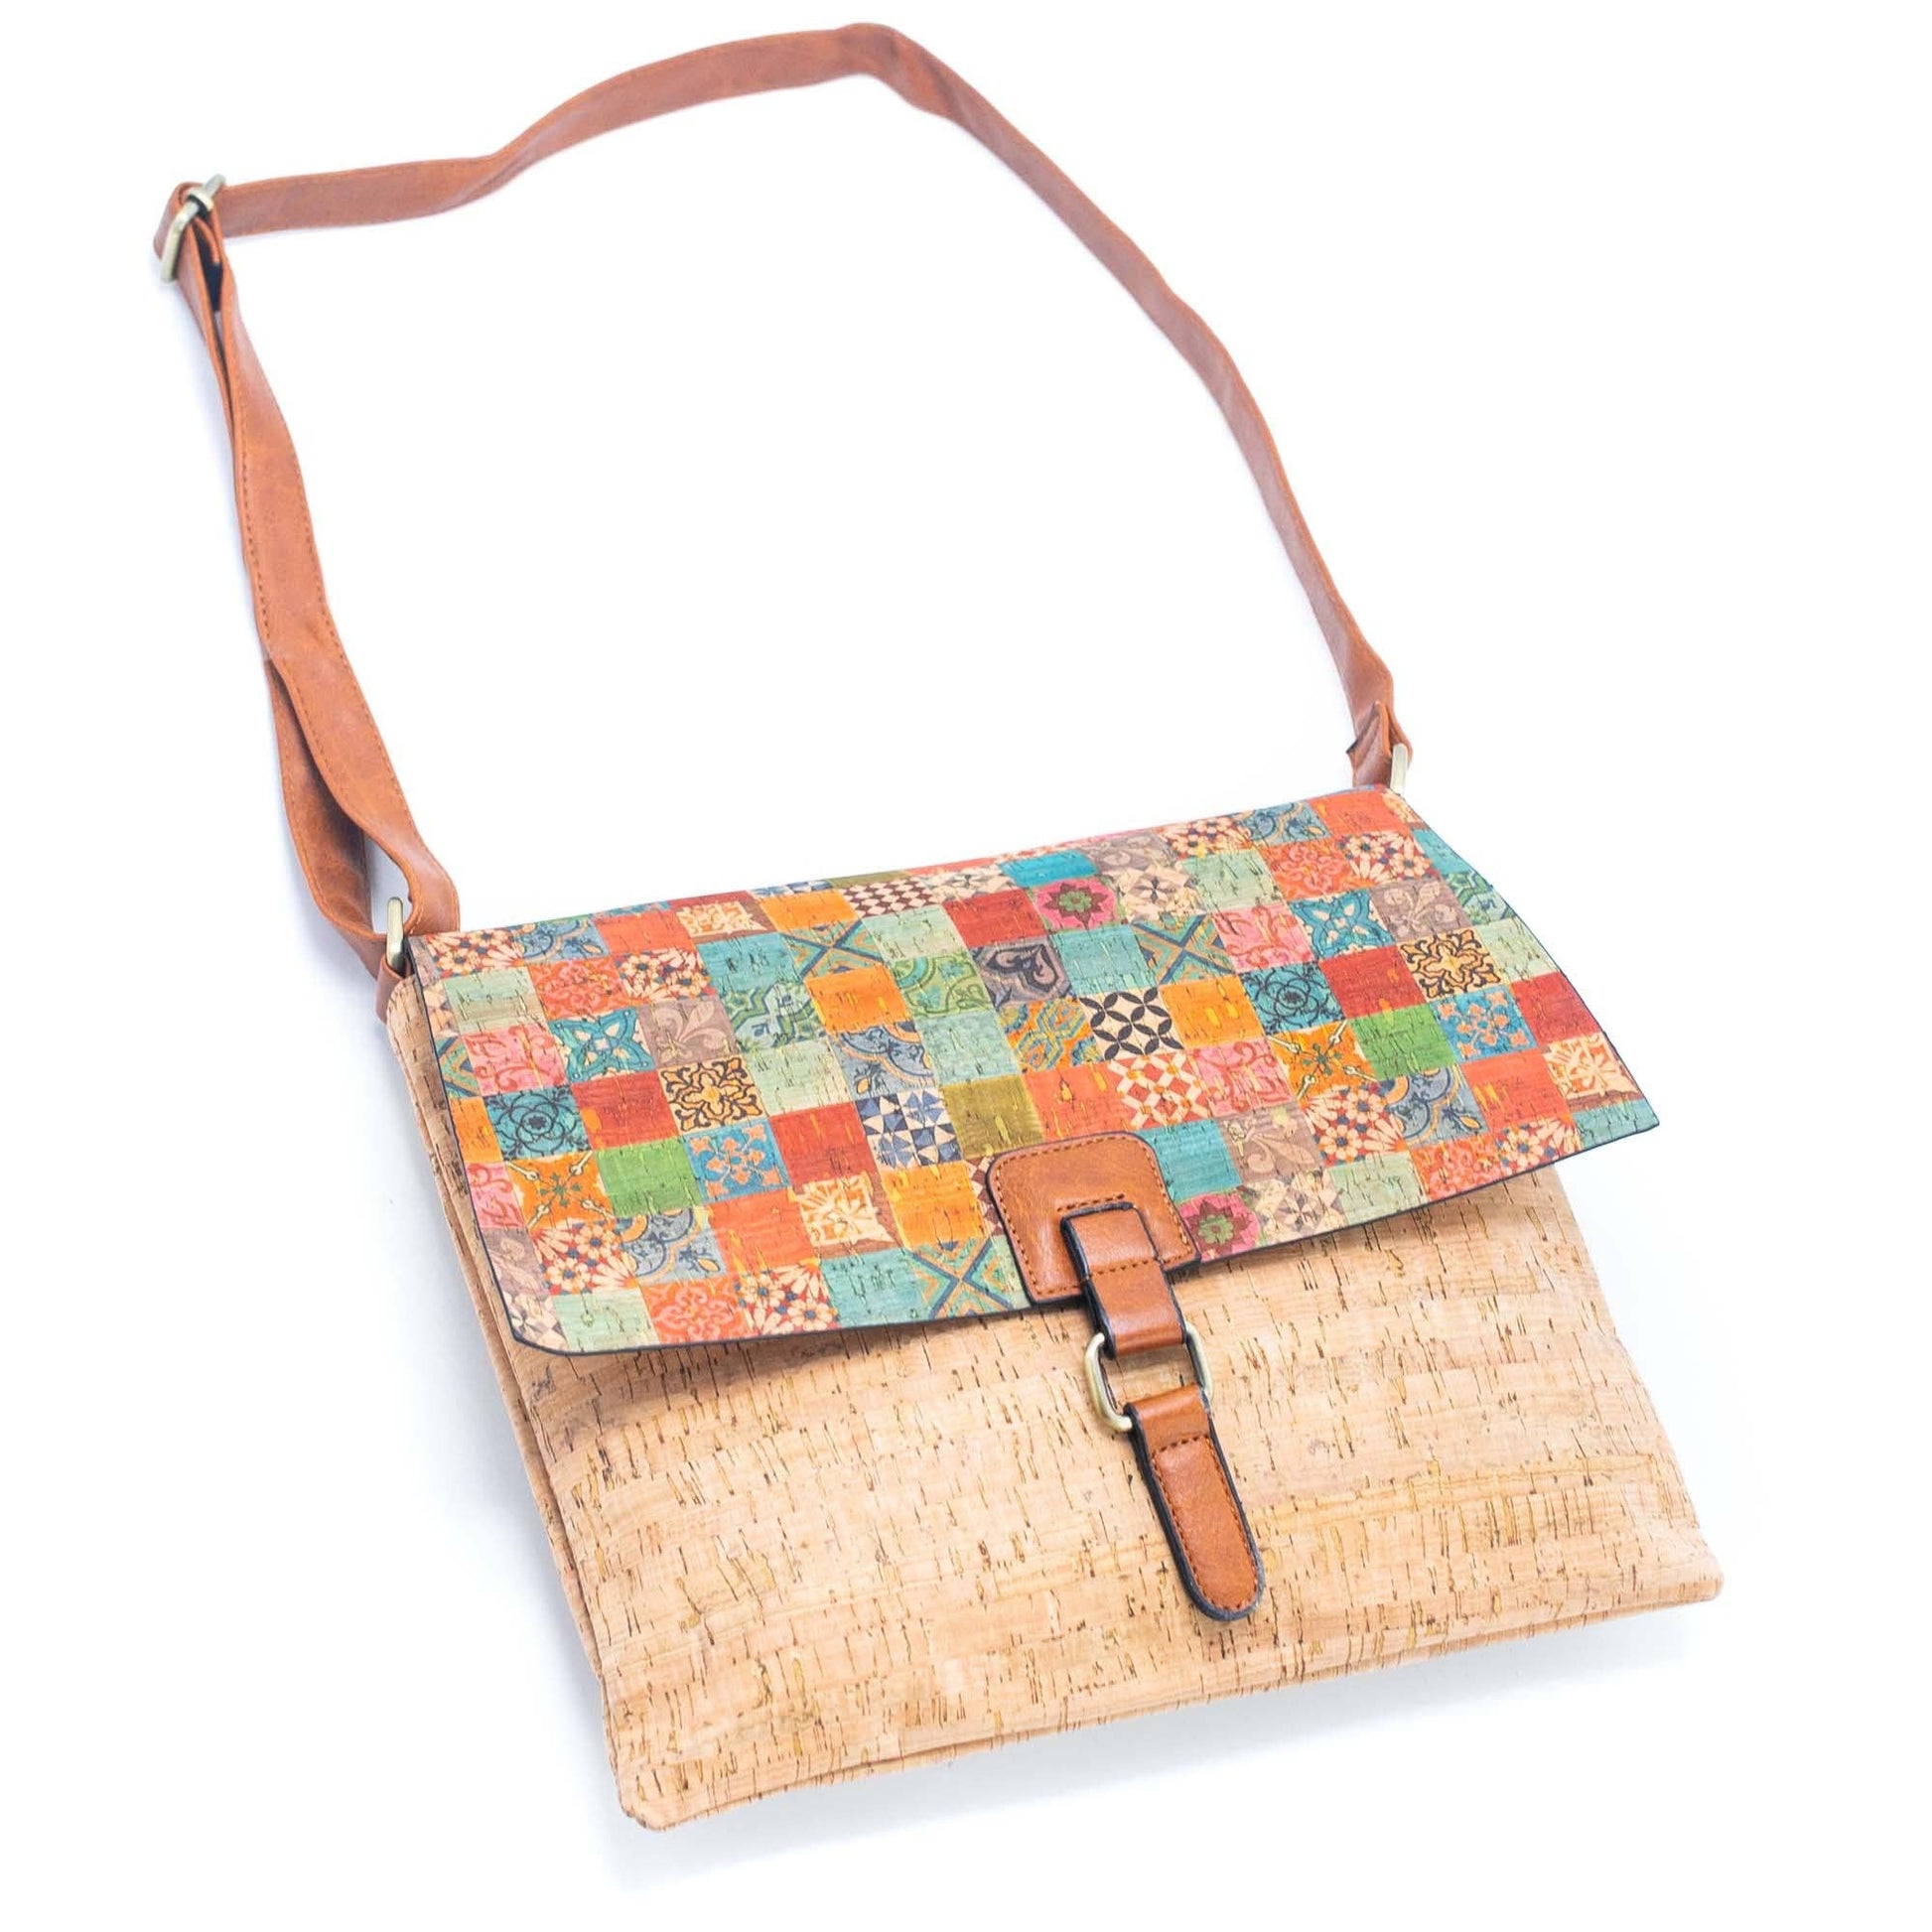 Cork Crossbody Bag with Mosaic and Floral Prints BAGD-464-4